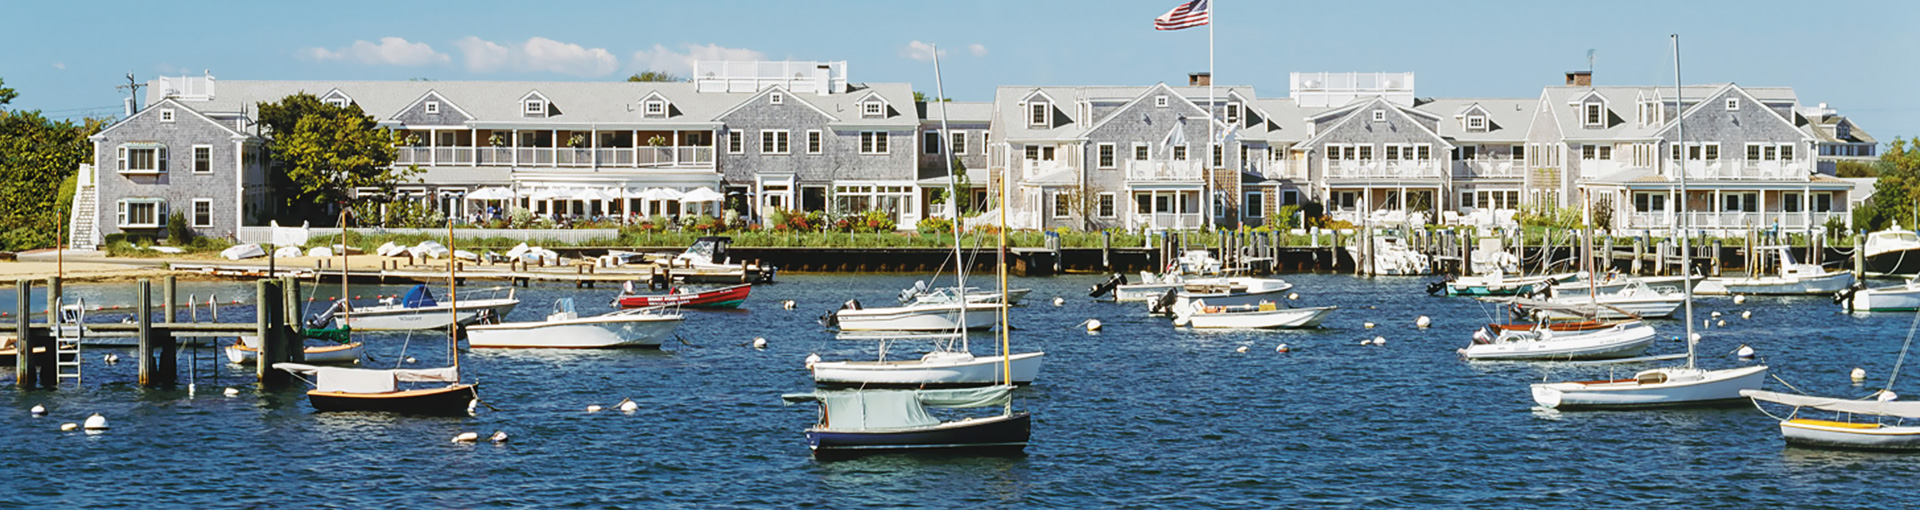 Know about White Elephant Resorts, Nantucket